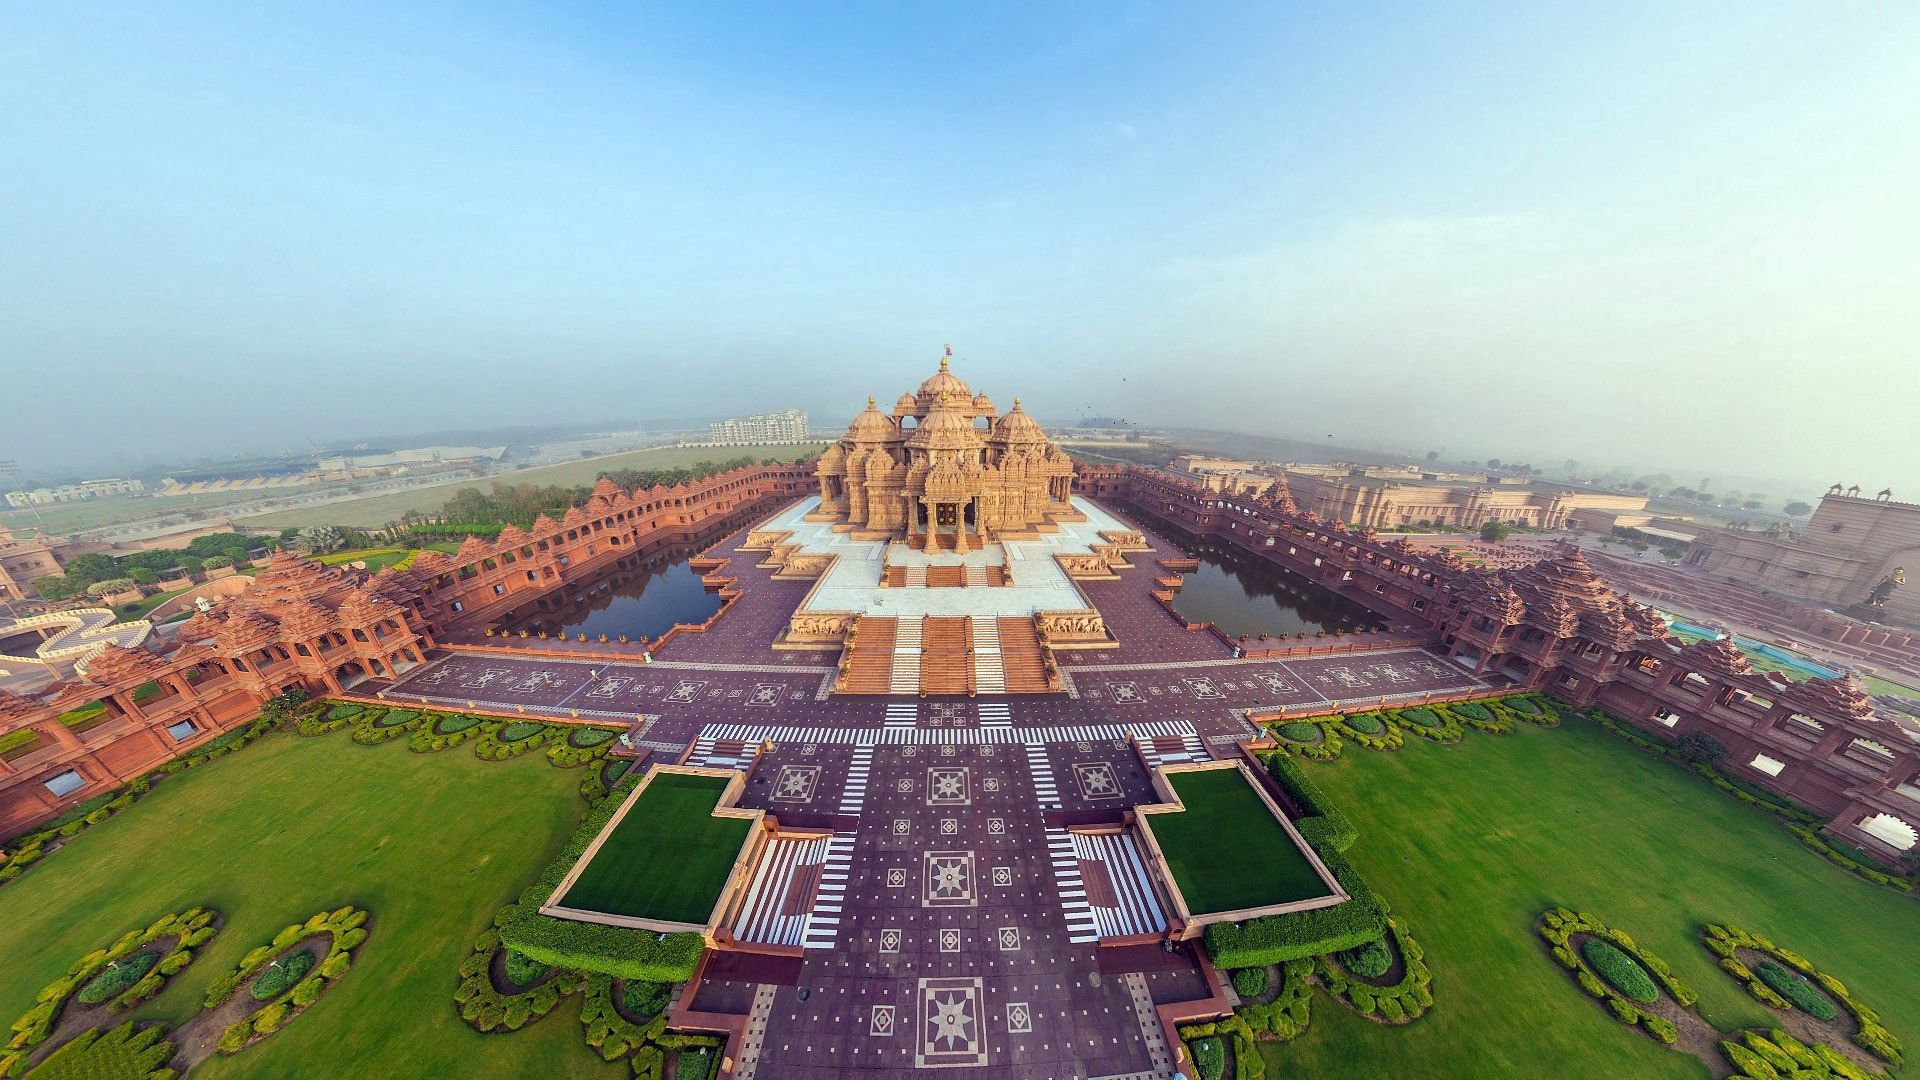 india, handsomely, akshardham temple, panorama, cities, view from above, it's beautiful Free Stock Photo